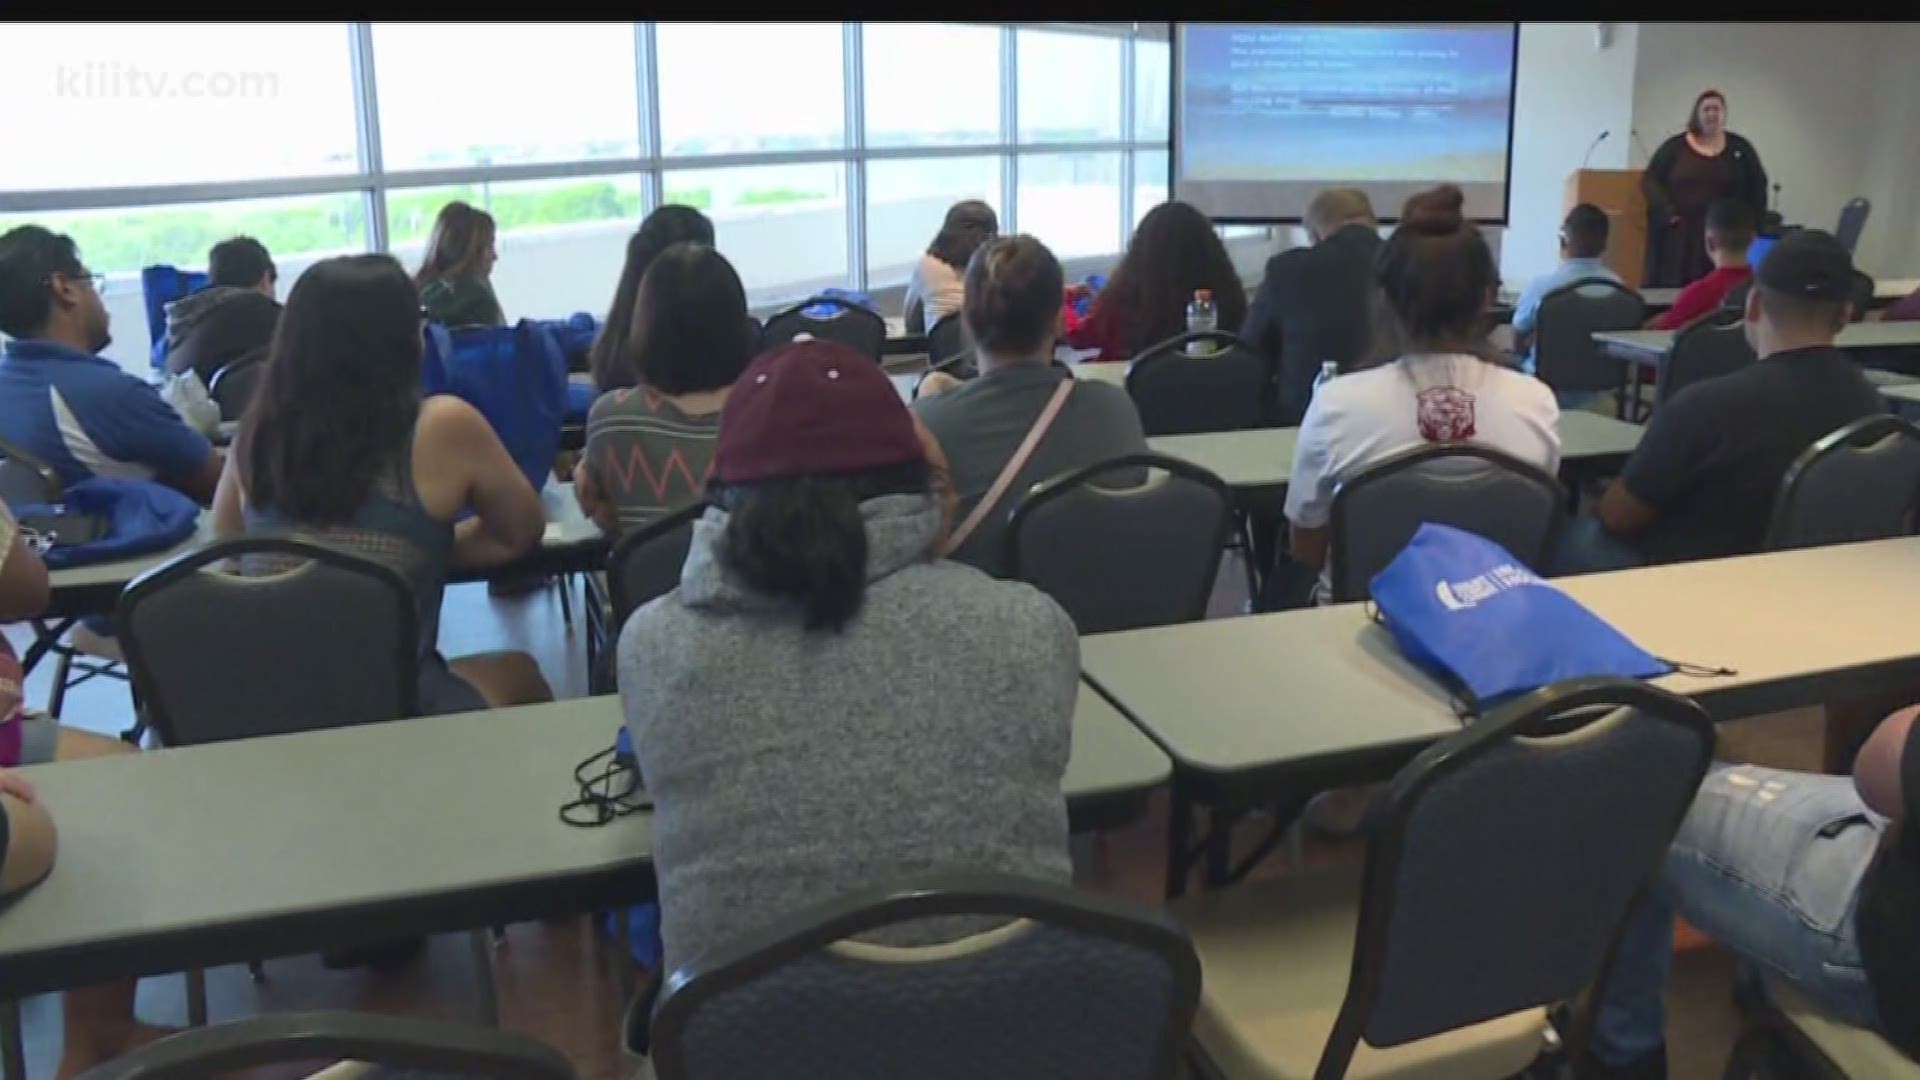 Dozens of foster children who dream about going to college lined up Monday in the halls of Texas A&M University-Corpus Christi to get a glimpse of what their future could look like at college.